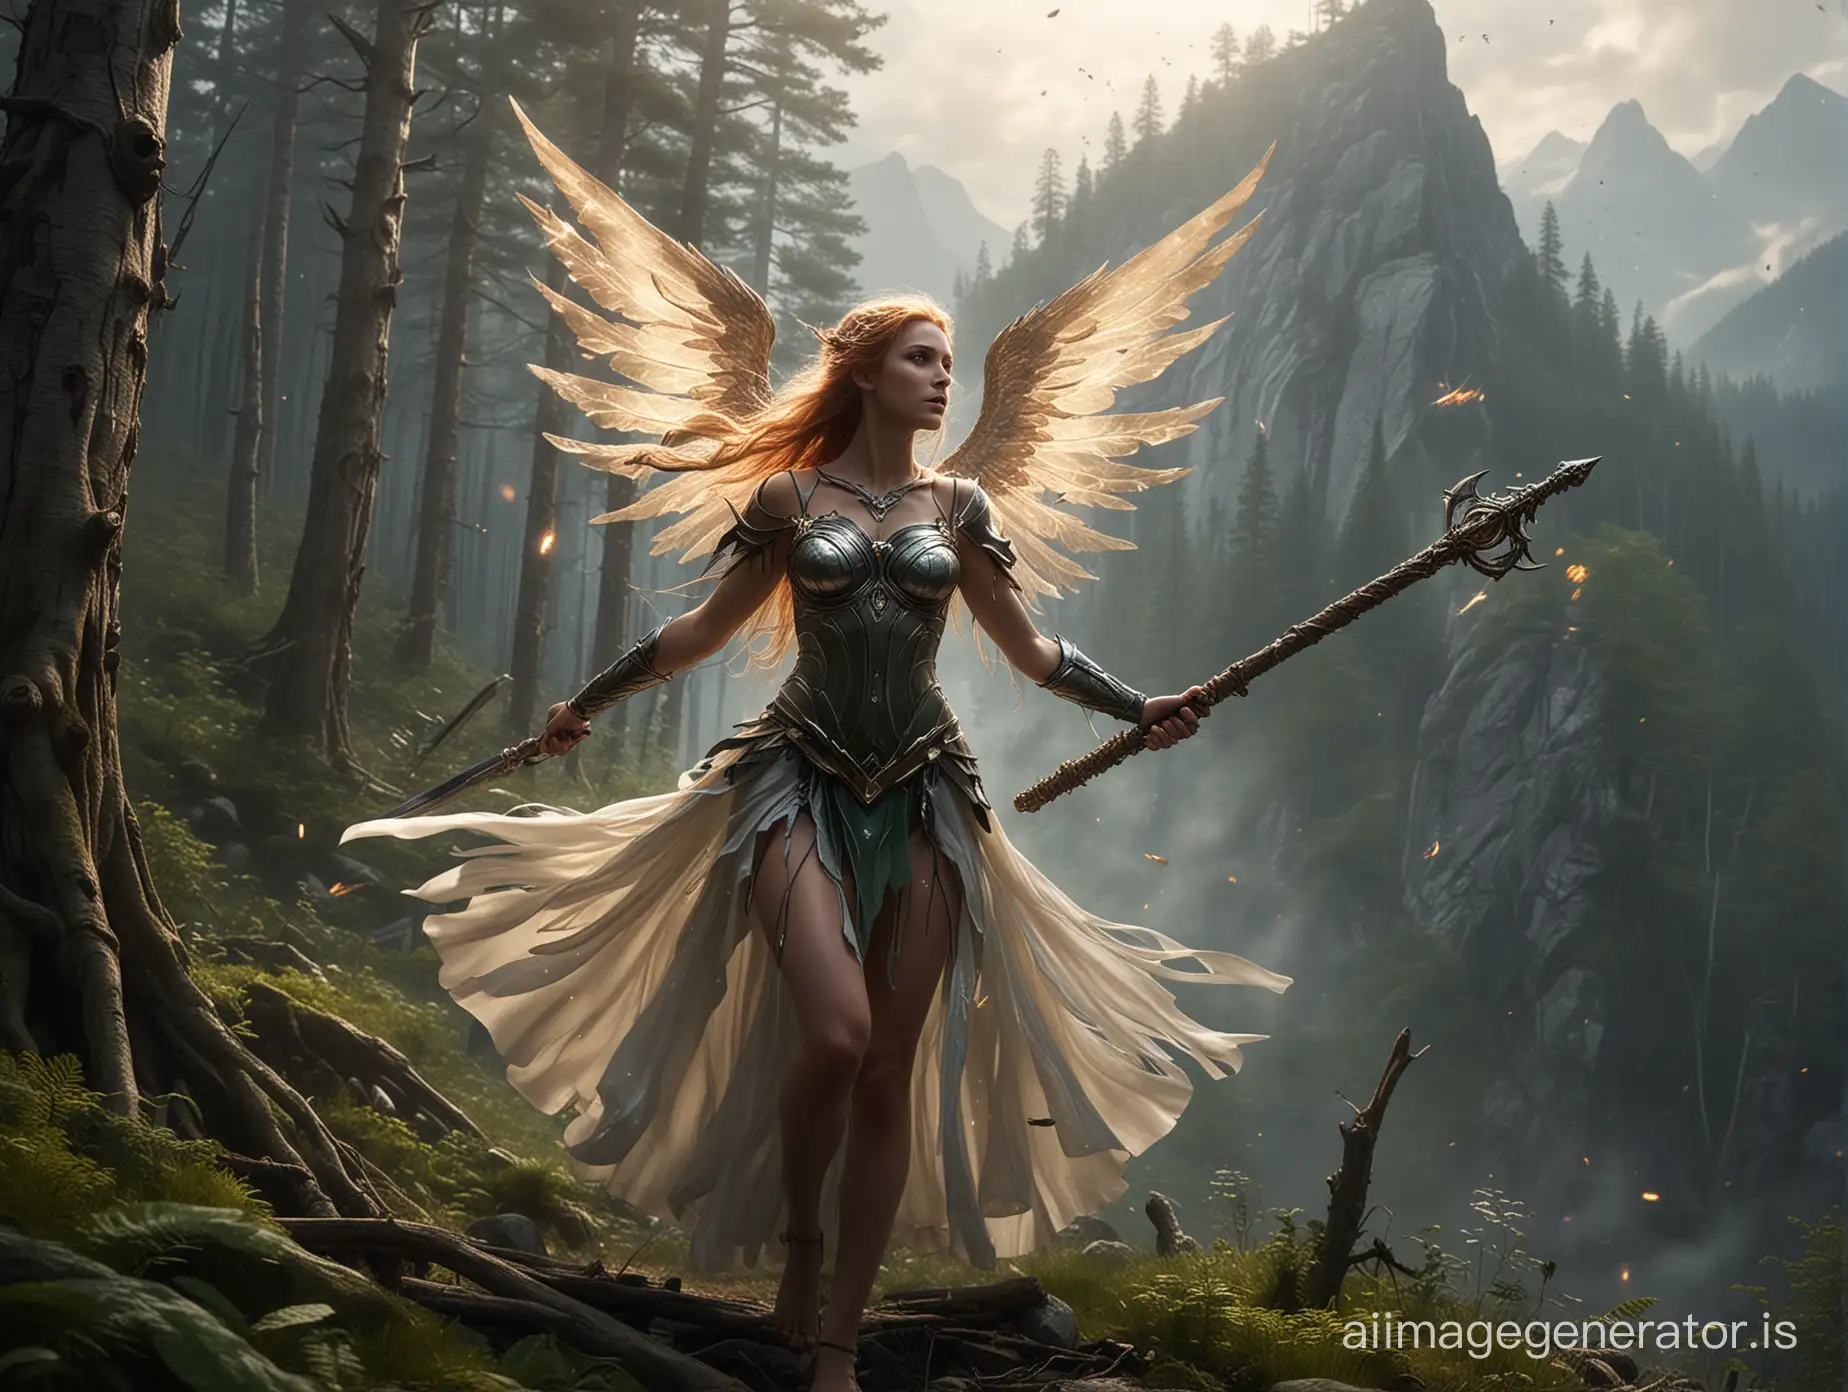 New task, against the backdrop of a mountain, a battle unfolds between a female forest nymph and a female angel. The forest nymph wielding a scepter made of wood, while the angel wields a sword. The moment I want to capture is when their weapons clash and sparks begin to fly from them.